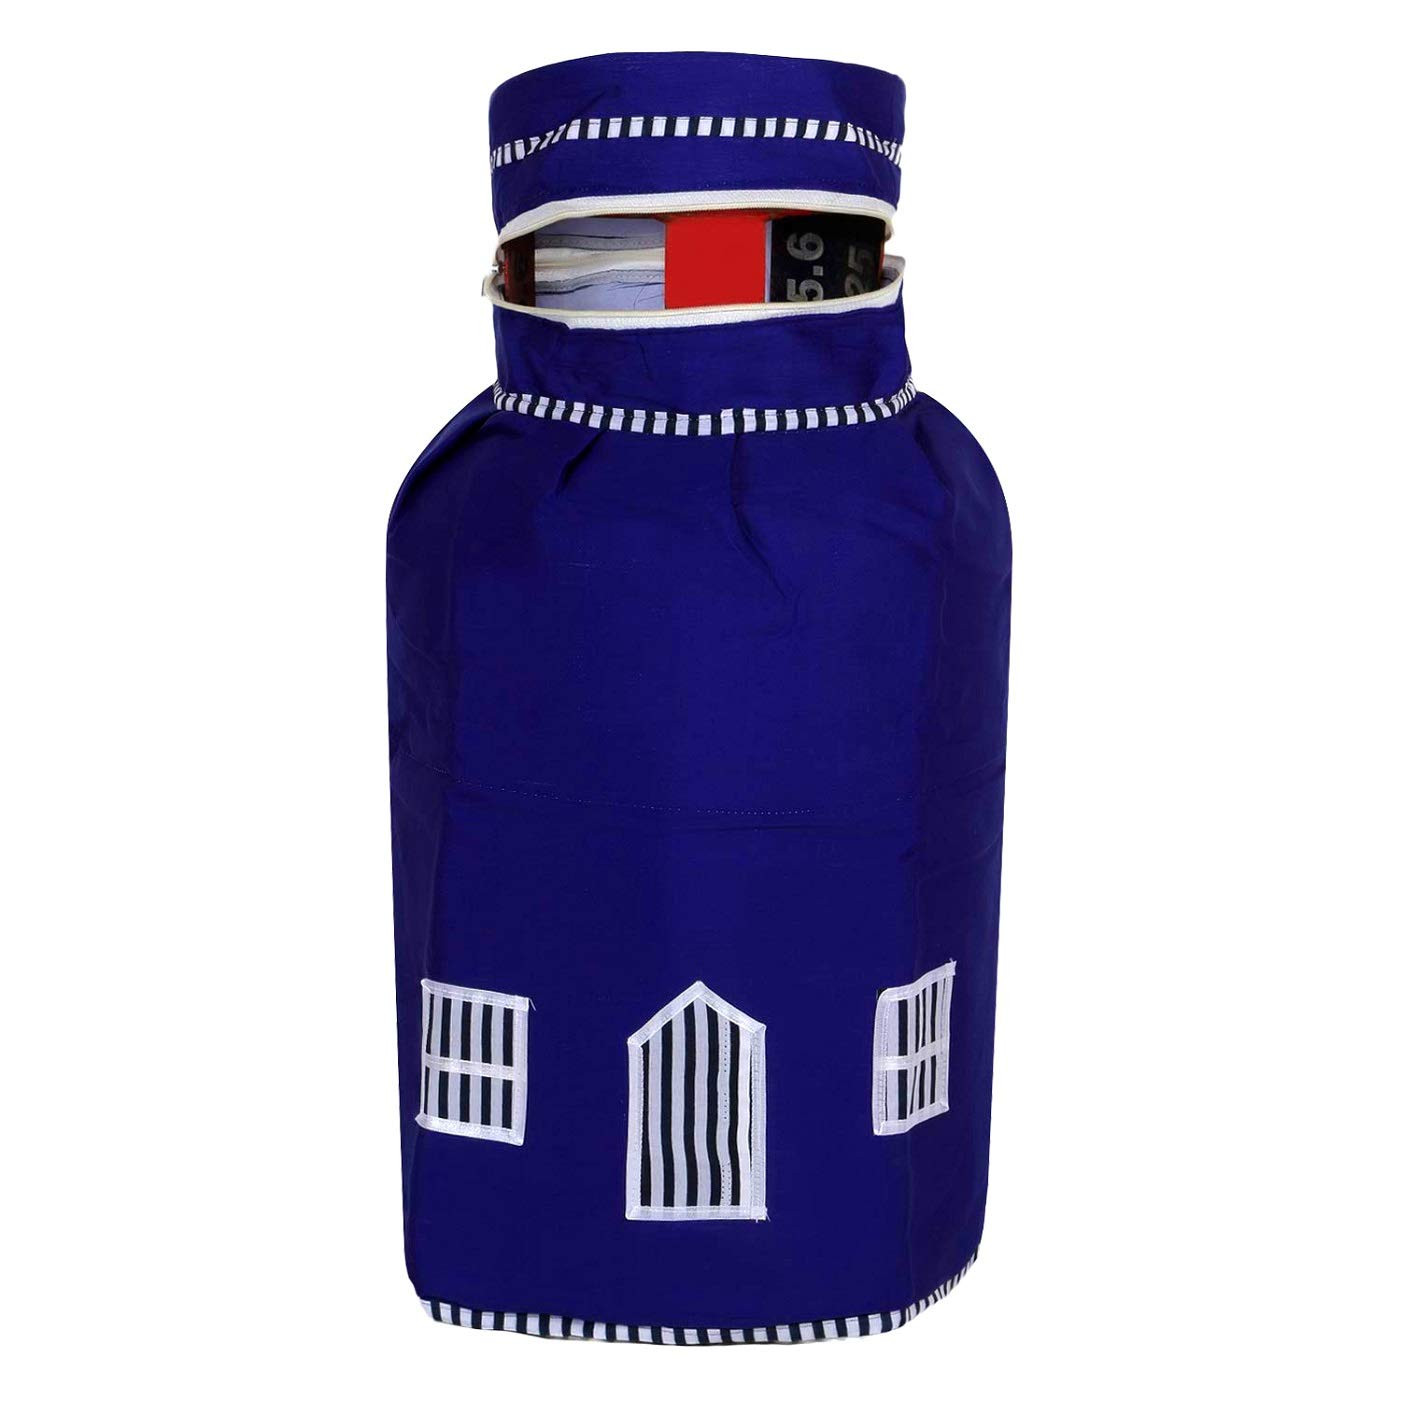 Kuber Industries Cotton Dust-Water Proof LPG Gas Cylinder Fittedsheet Cover (Blue, Standard, CTKTC040750) - 2 Pieces